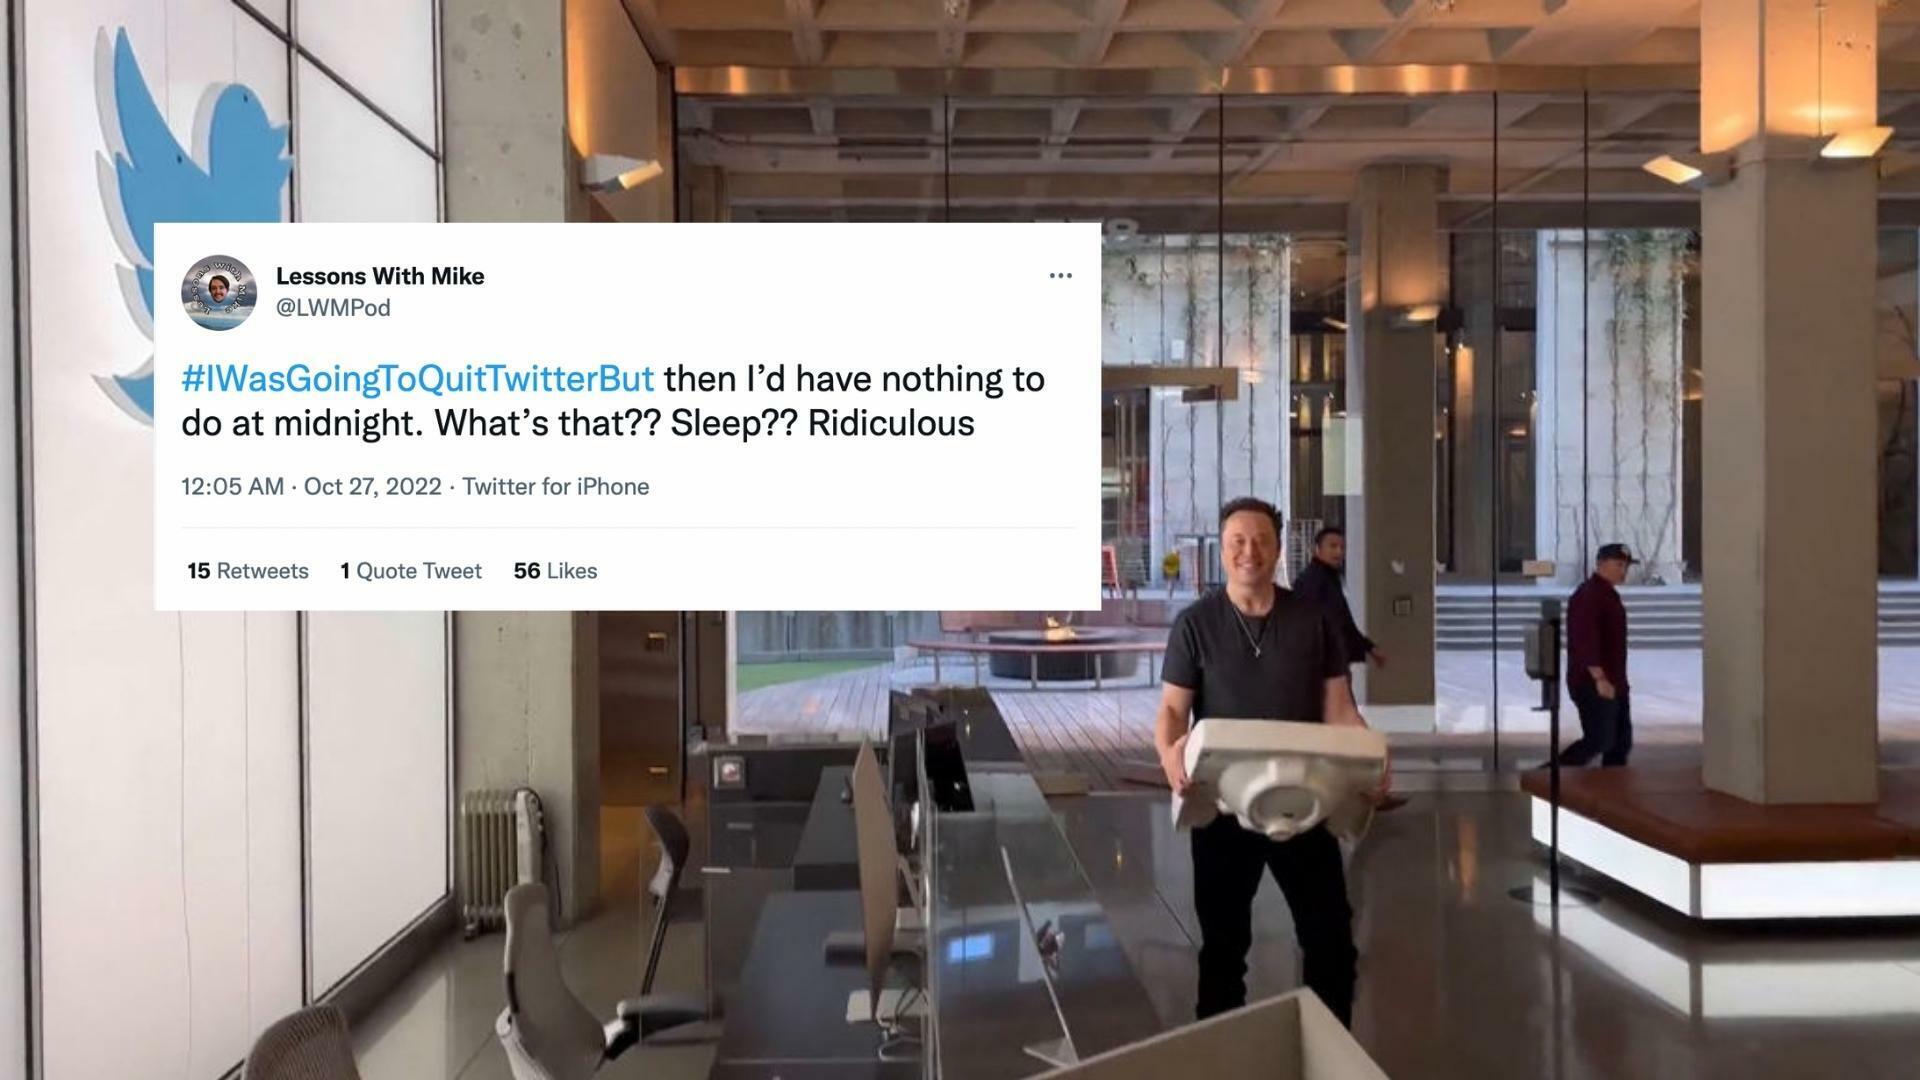 Tweets about not quitting Twitter against backdrop of Elon Musk holding a sink at Twitter HQ